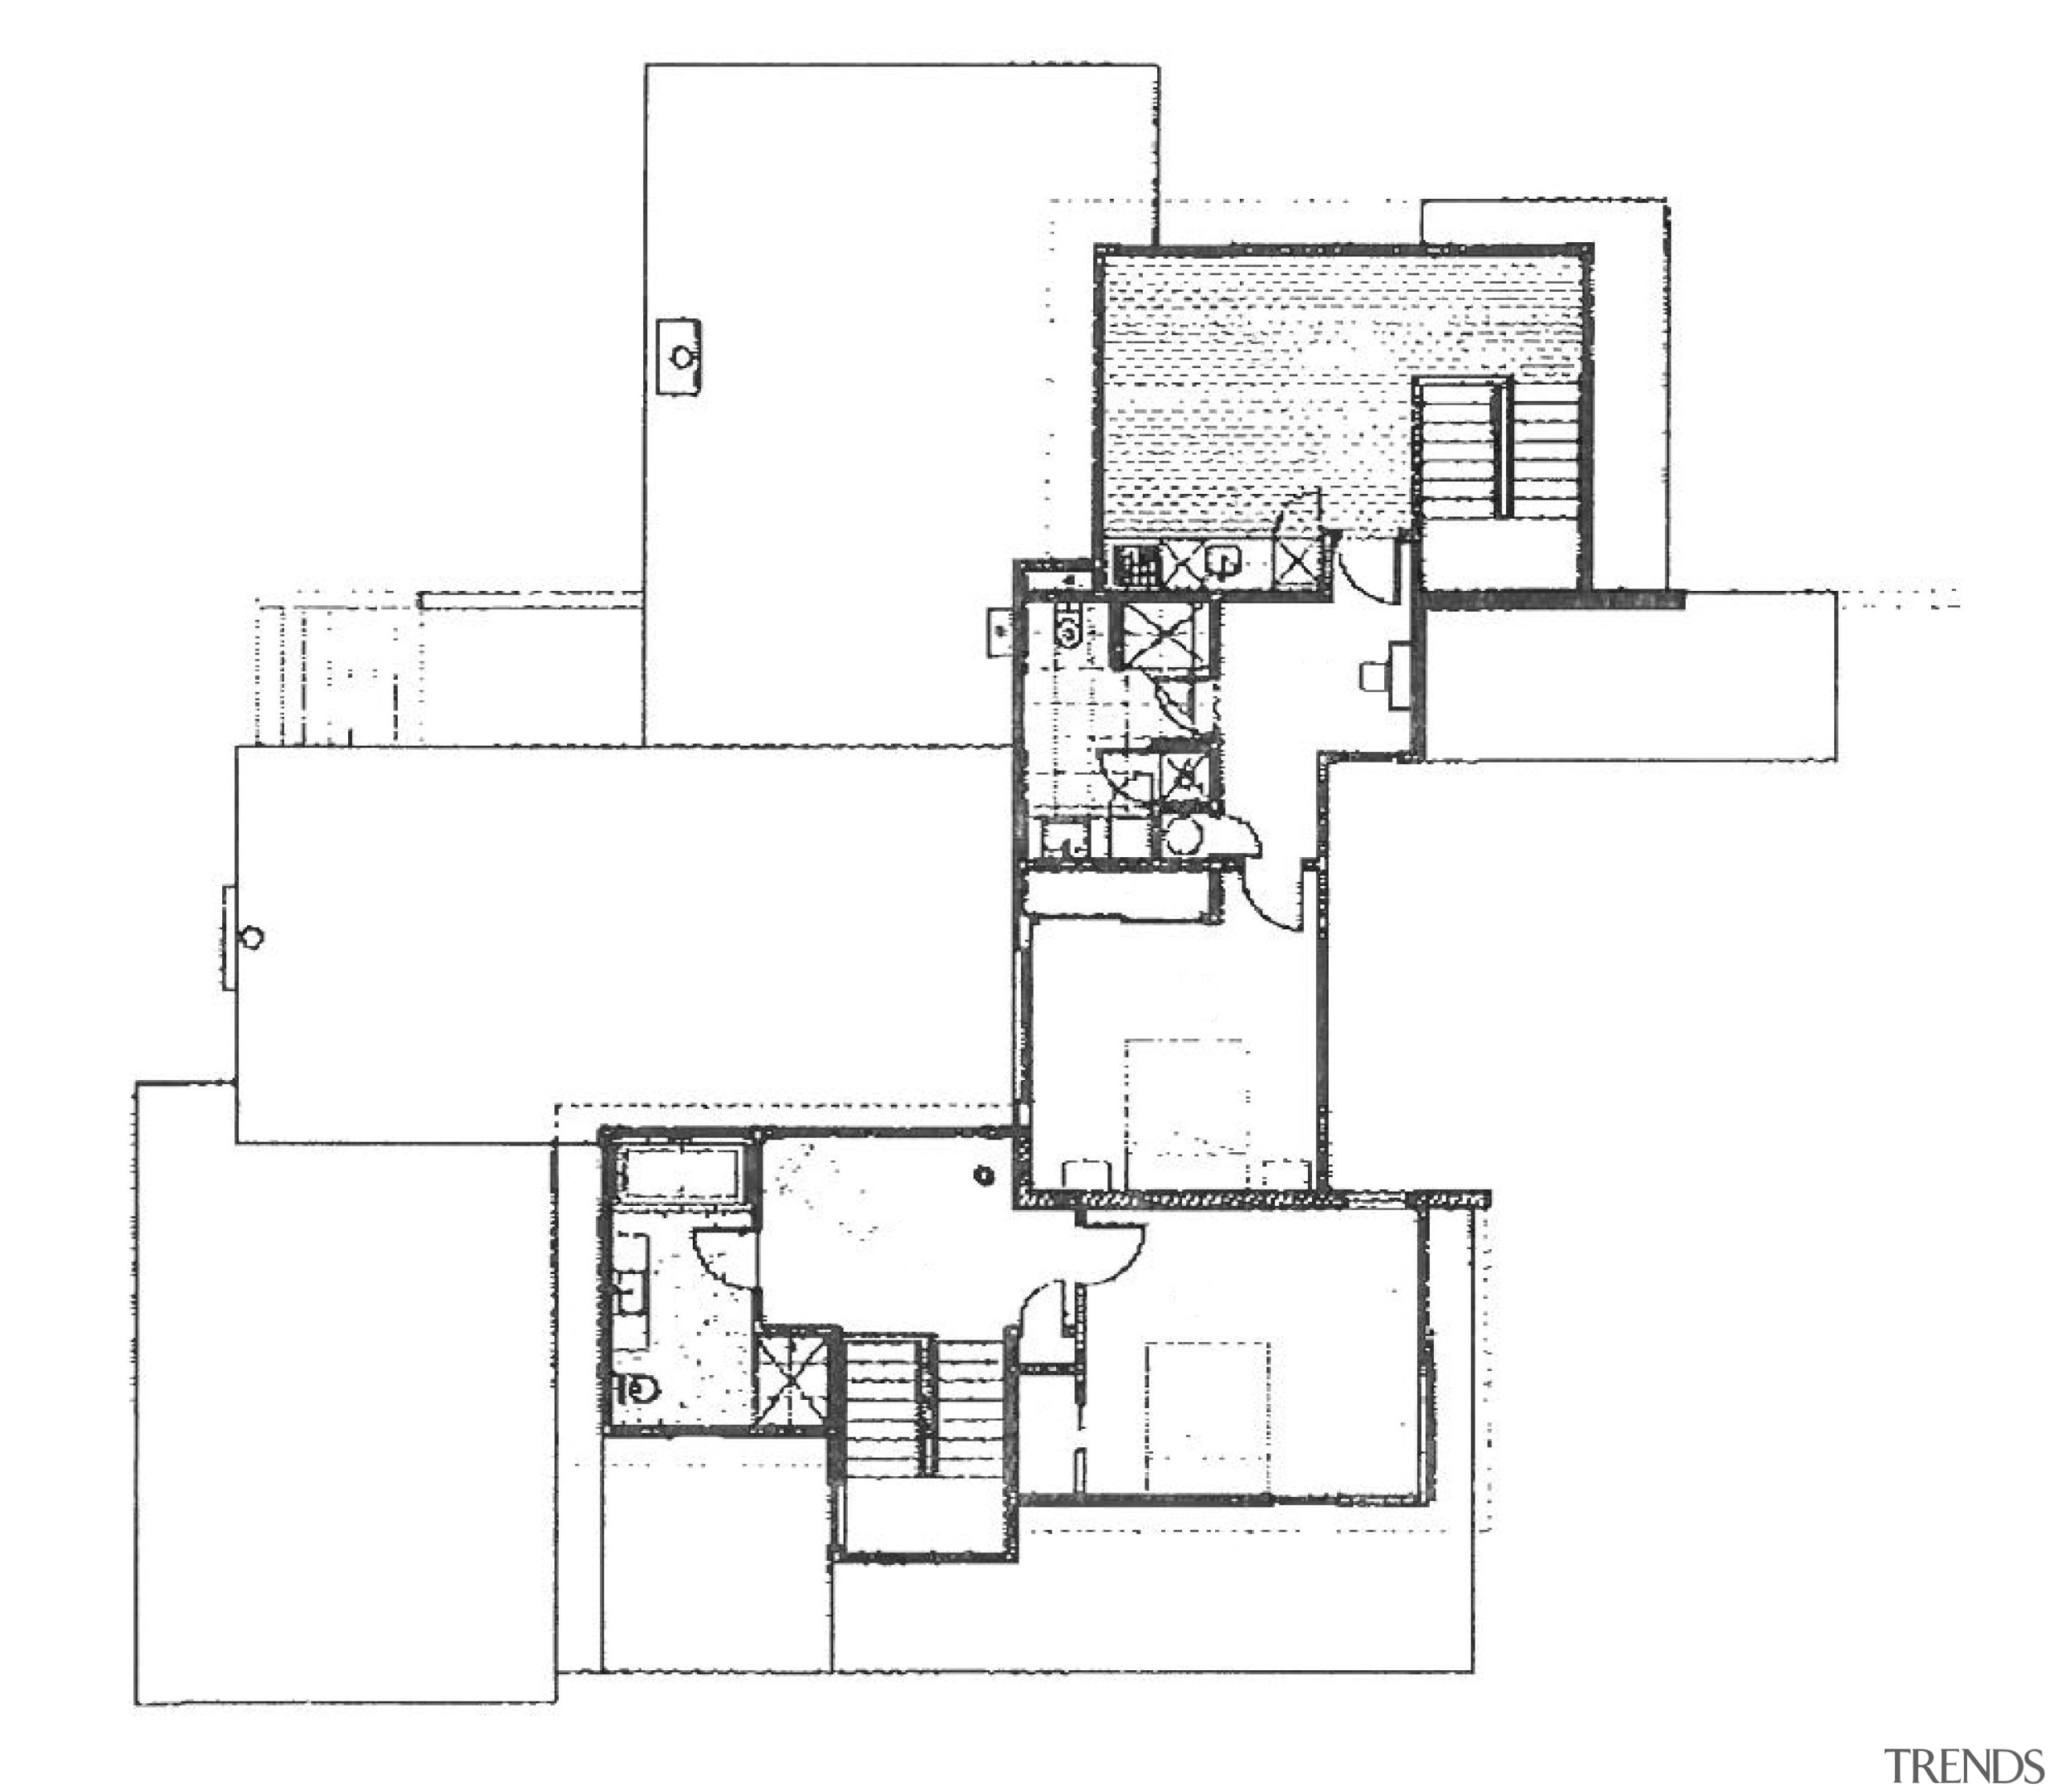 View of architectural floor plans. - View of area, artwork, design, diagram, drawing, floor plan, line, plan, product, product design, structure, technical drawing, white